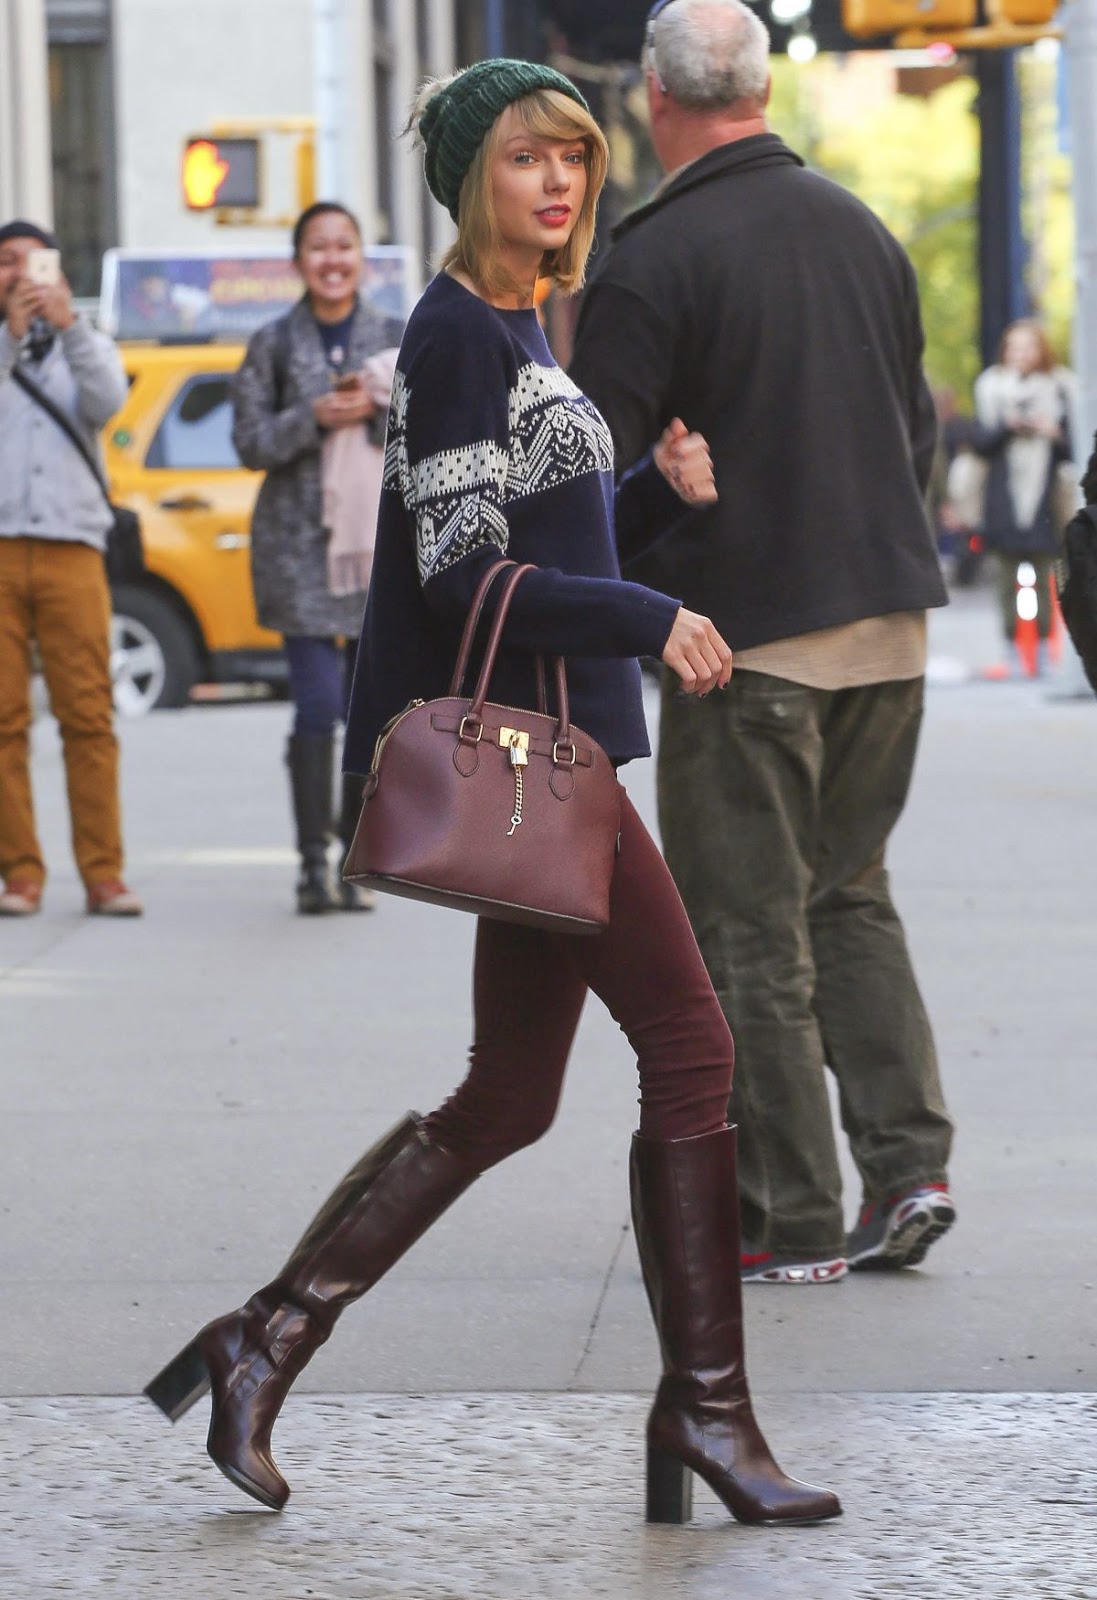 Shoe Game of the Stars: & Other Stories Leather Knee Boot - Taylor Swift